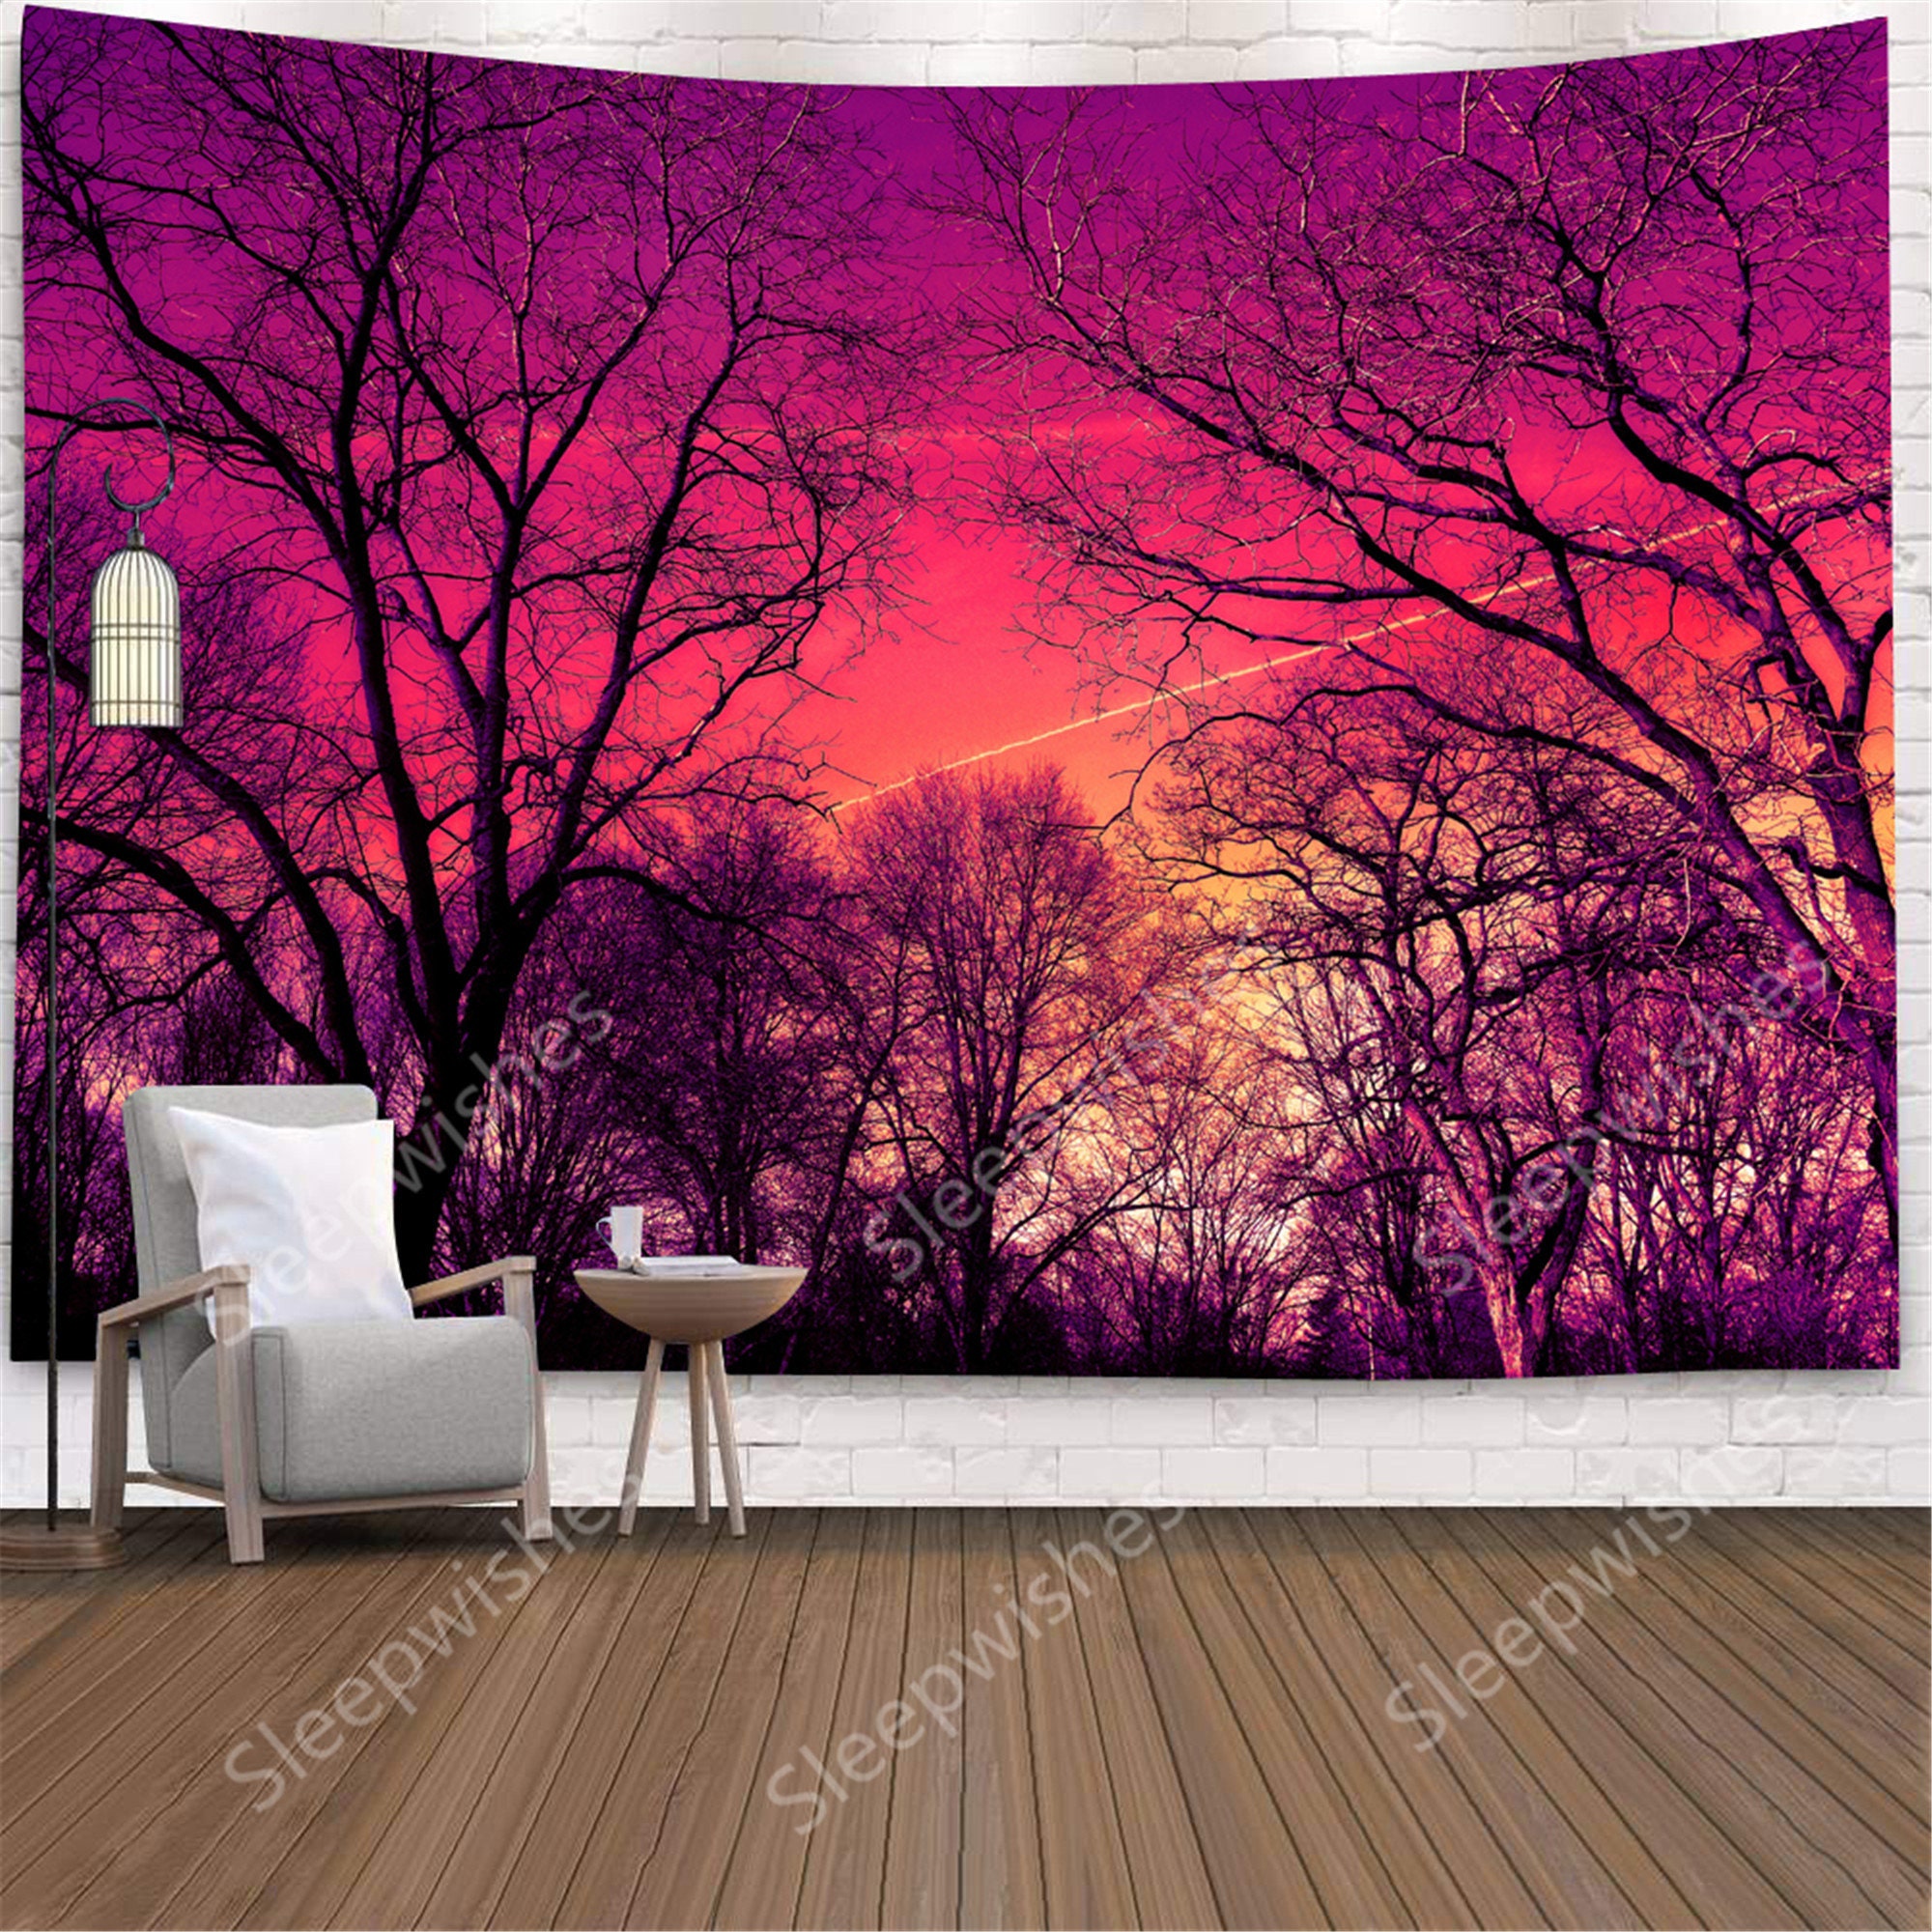 NYMB Fantasy Mushroom Tapestry Psychedelic Mushroom Tapestries Fantasy Starry Sky Elf Forest Plant Colorful Natural Landscape Tapestry Wall Art Hanging for Bedroom Living Room Dorm 